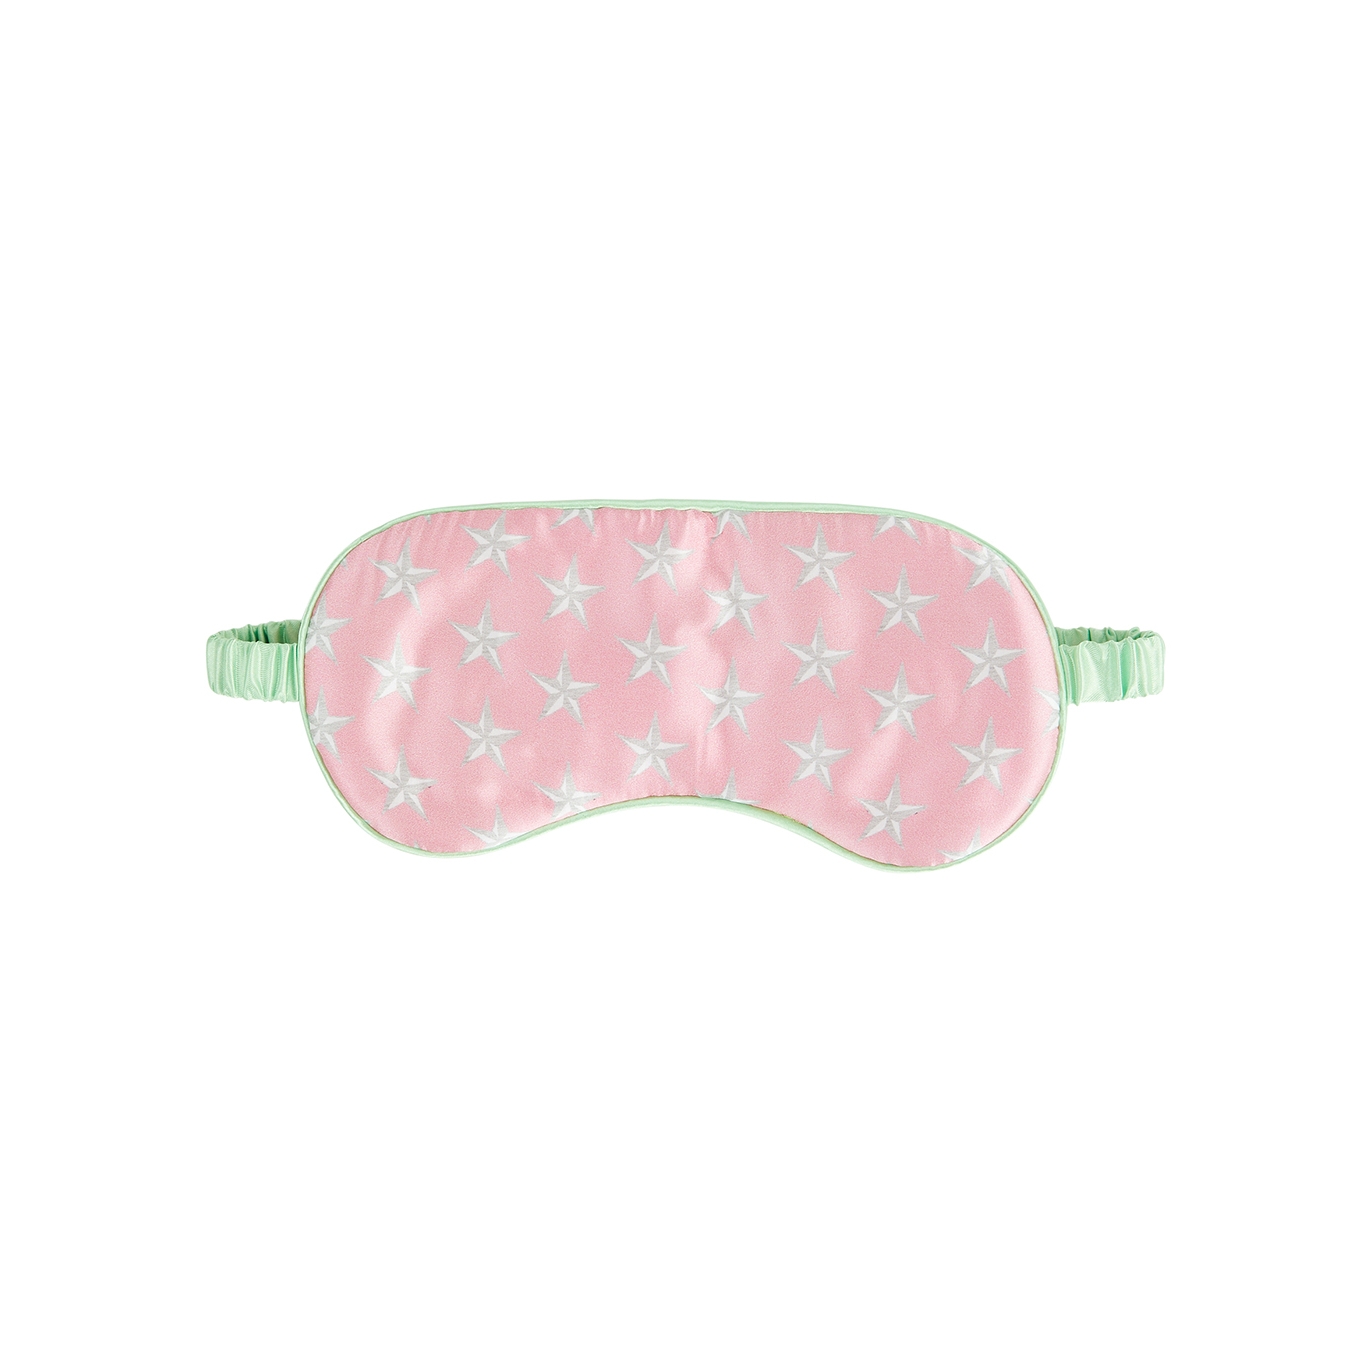 Jessica Russell Flint Pink Printed Silk Eye Mask - One Size